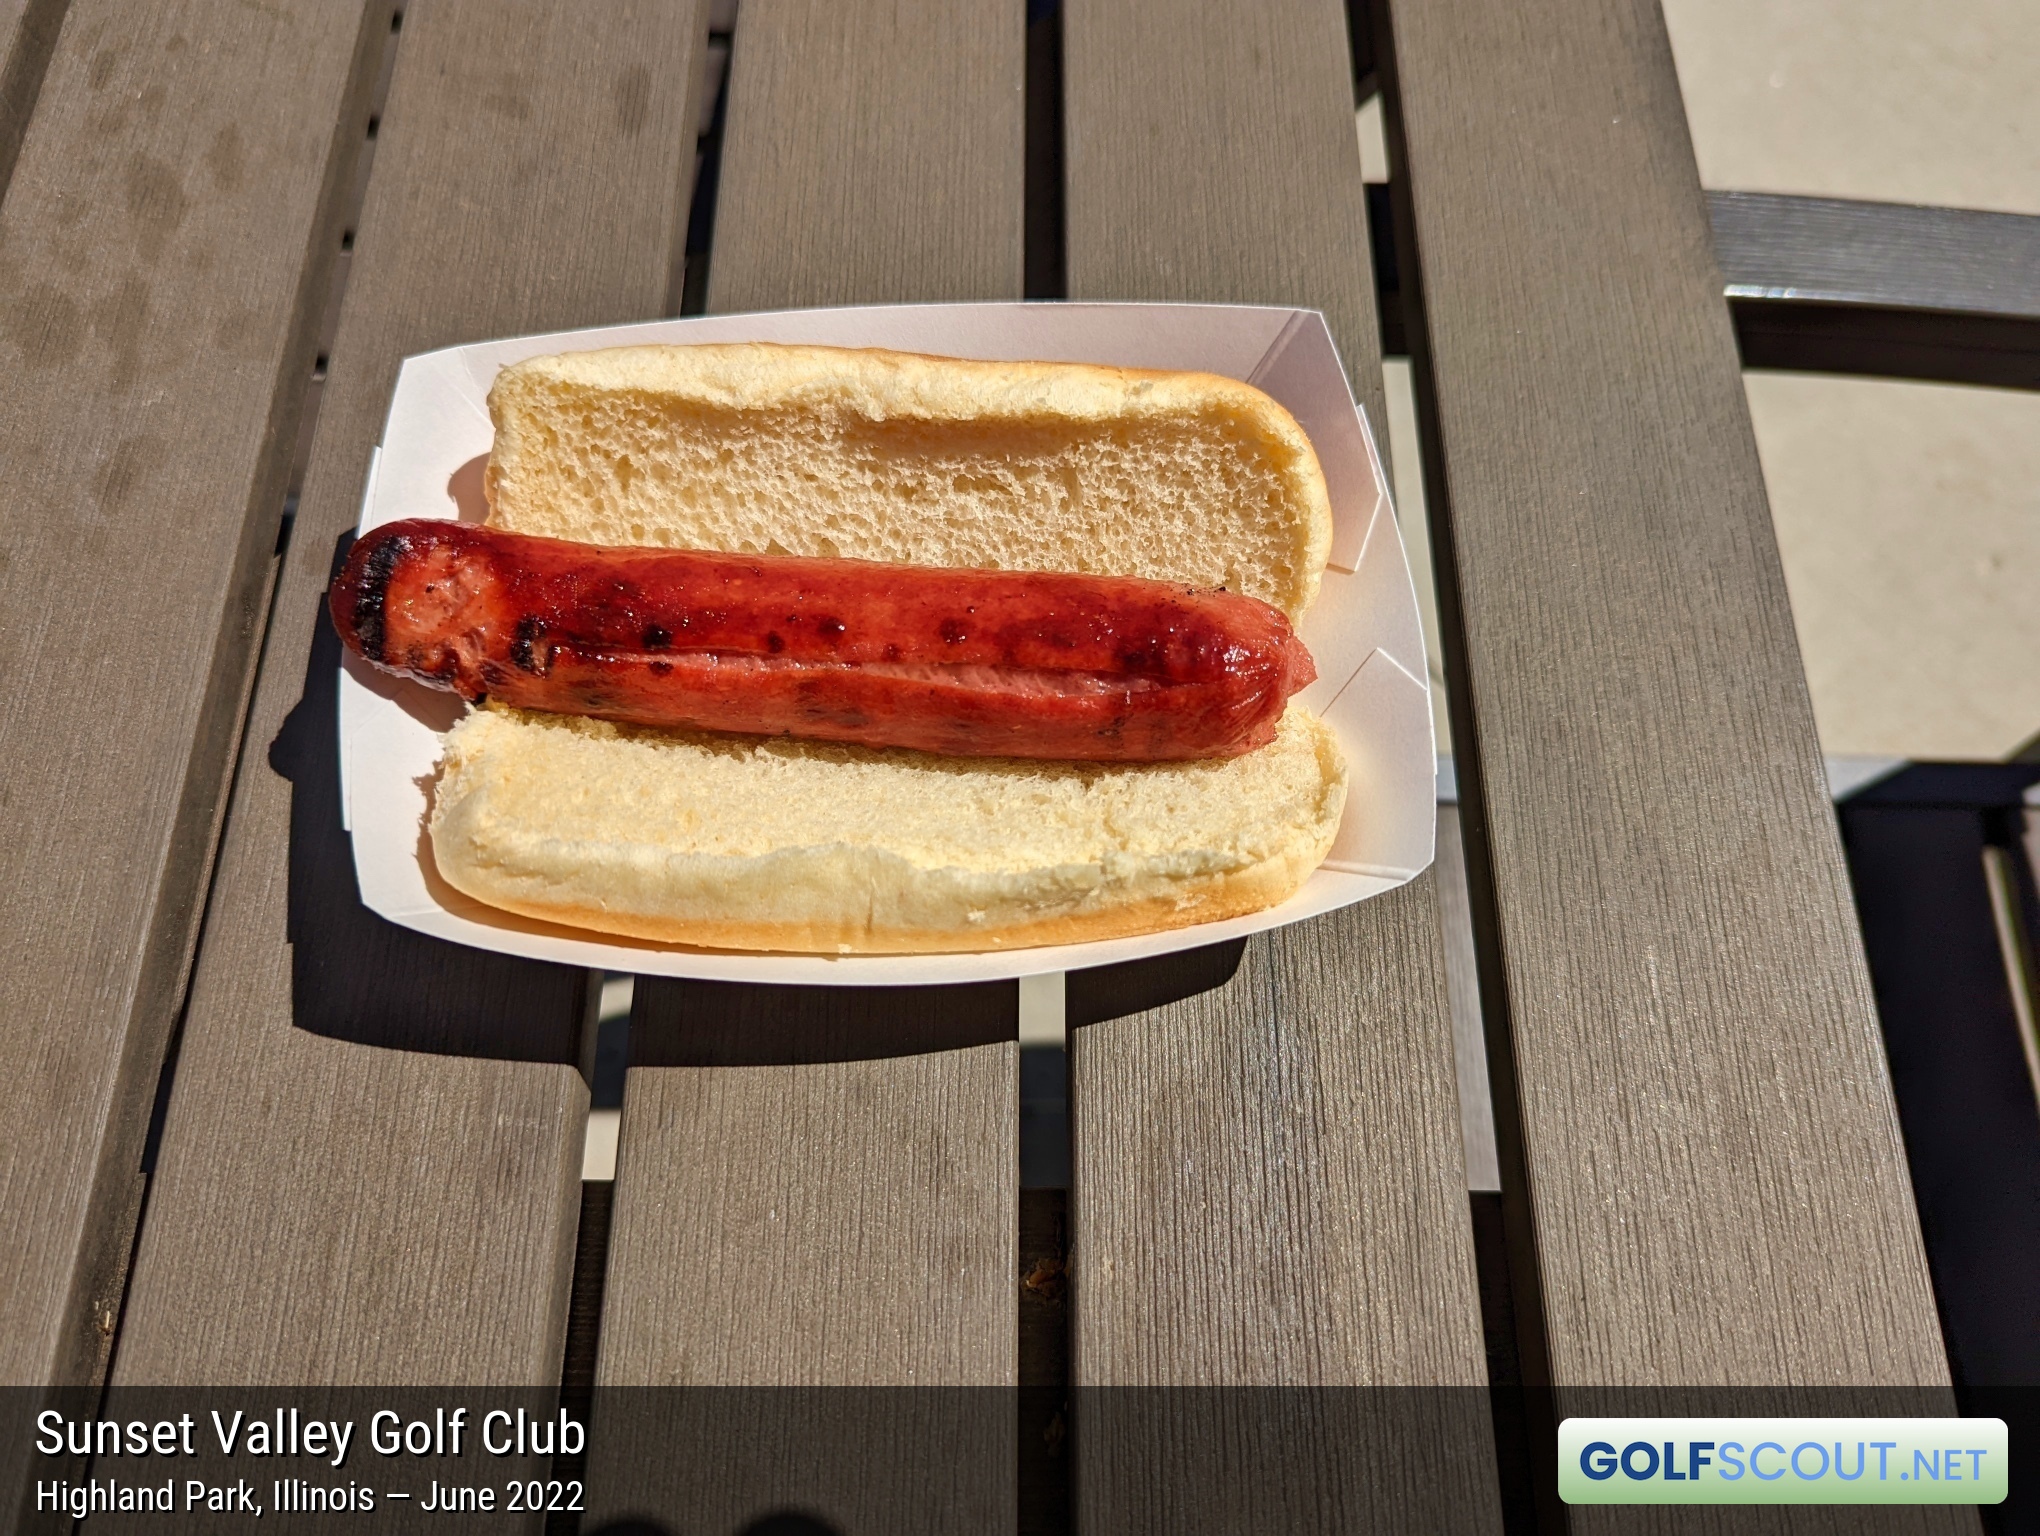 Photo of the food and dining at Sunset Valley Golf Club in Highland Park, Illinois. Photo of the hot dog at Sunset Valley Golf Club in Highland Park, Illinois.